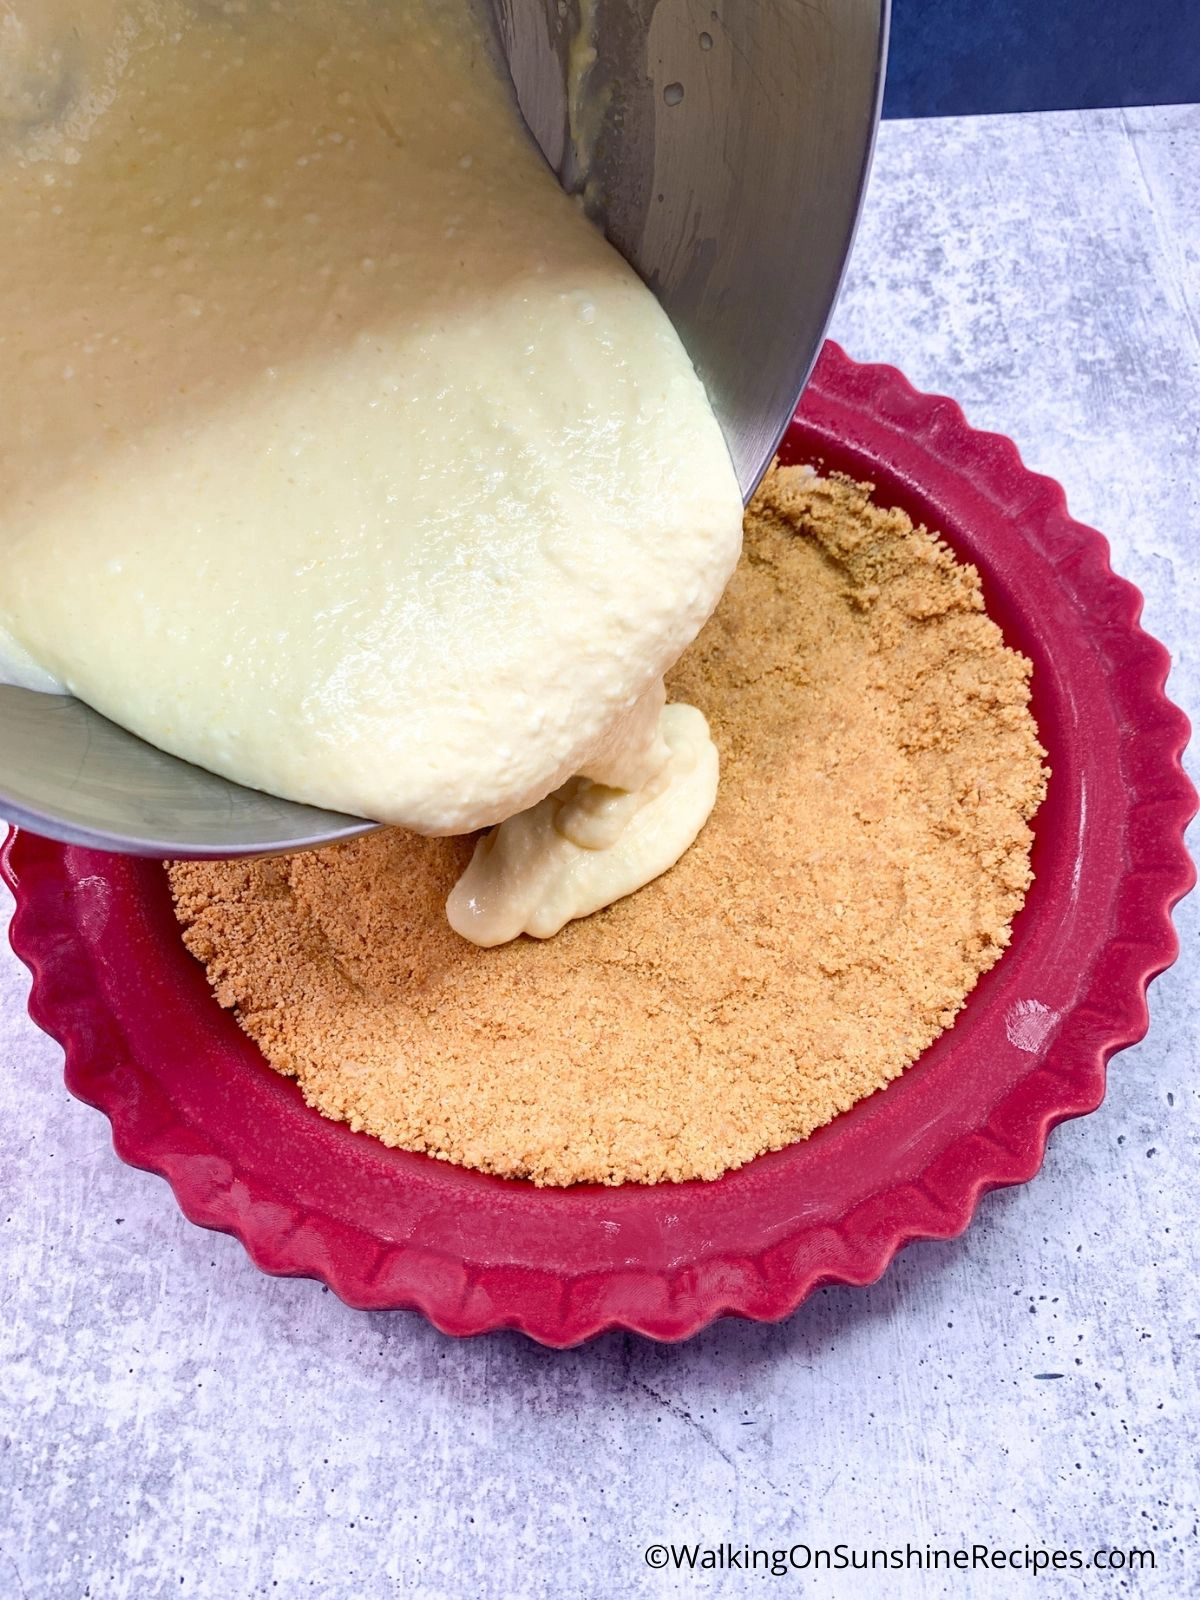 Pour pudding cheesecake into pie plate.